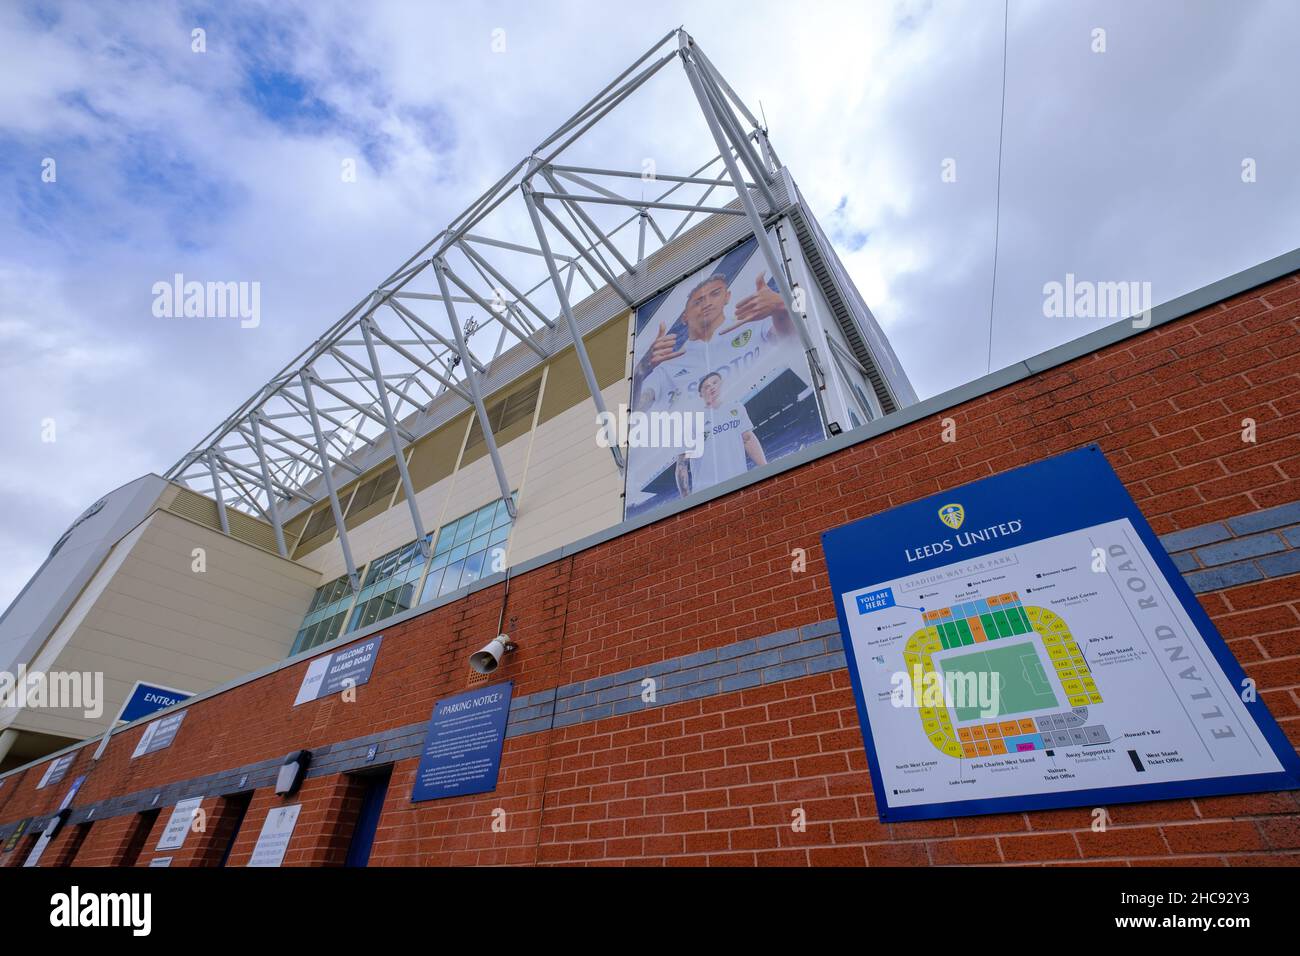 Leeds, United Kingdom - August 17, 2021: Exterior view of  Elland Road football stadium showing a plan of the stands in Leeds, England Stock Photo